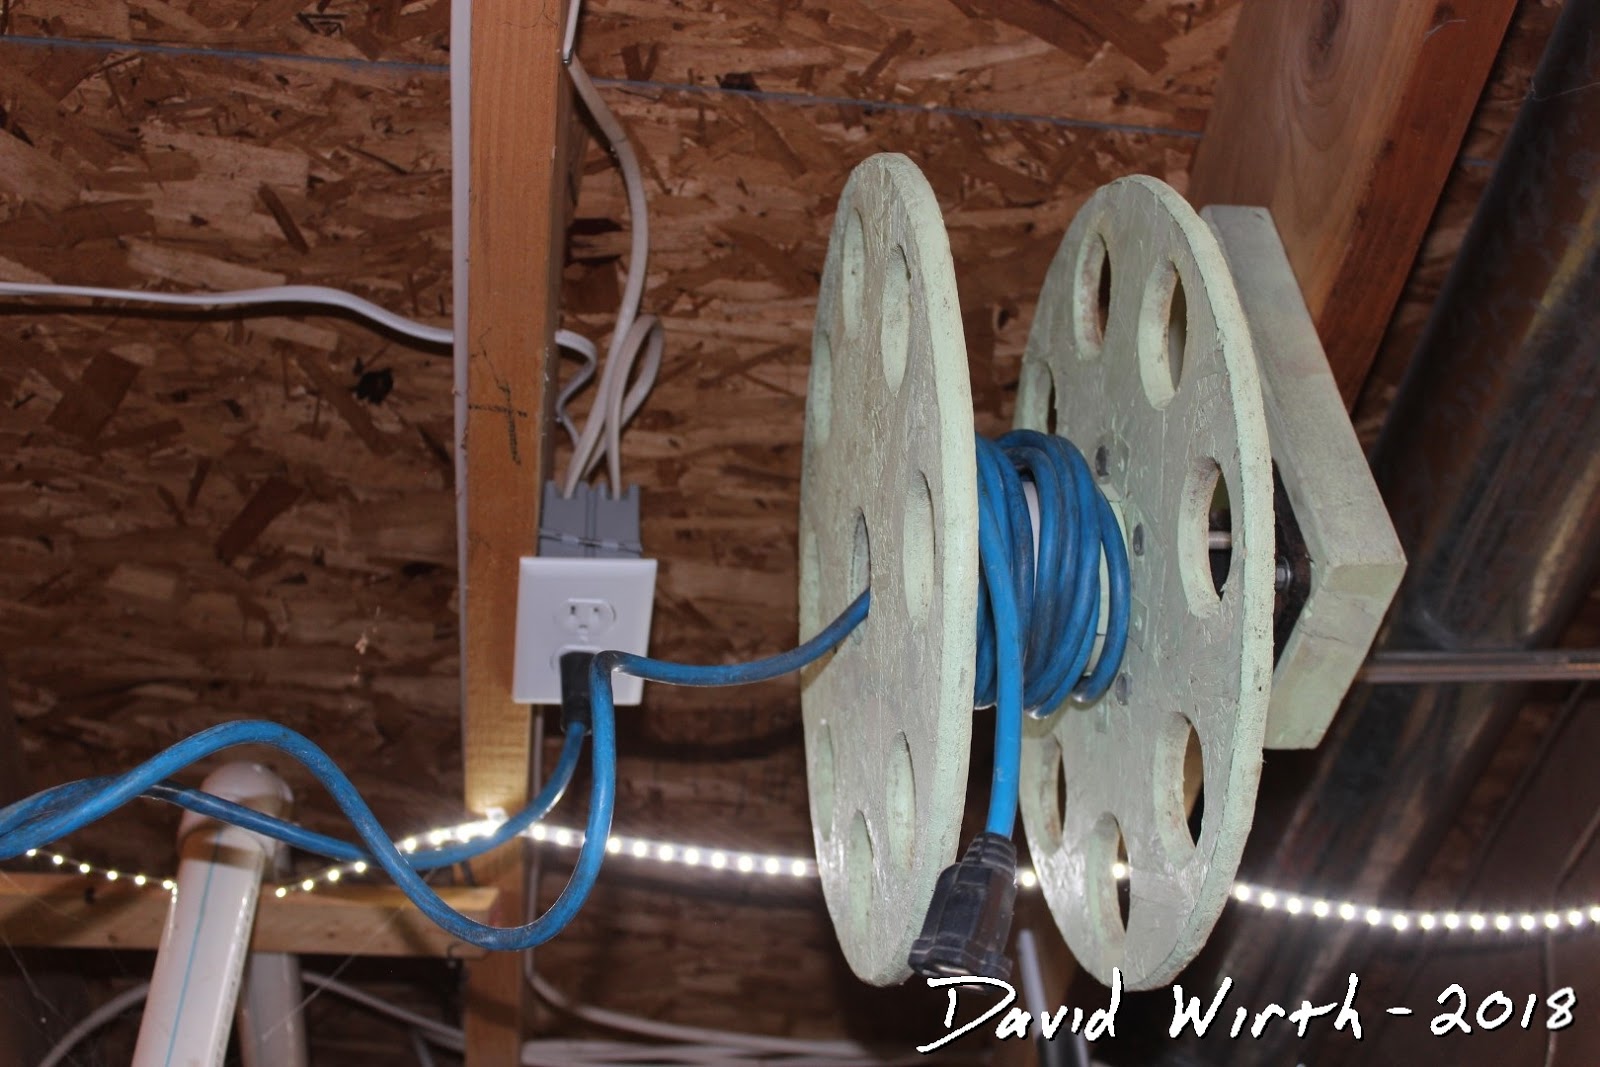 How to Installl&use extension cord reel 